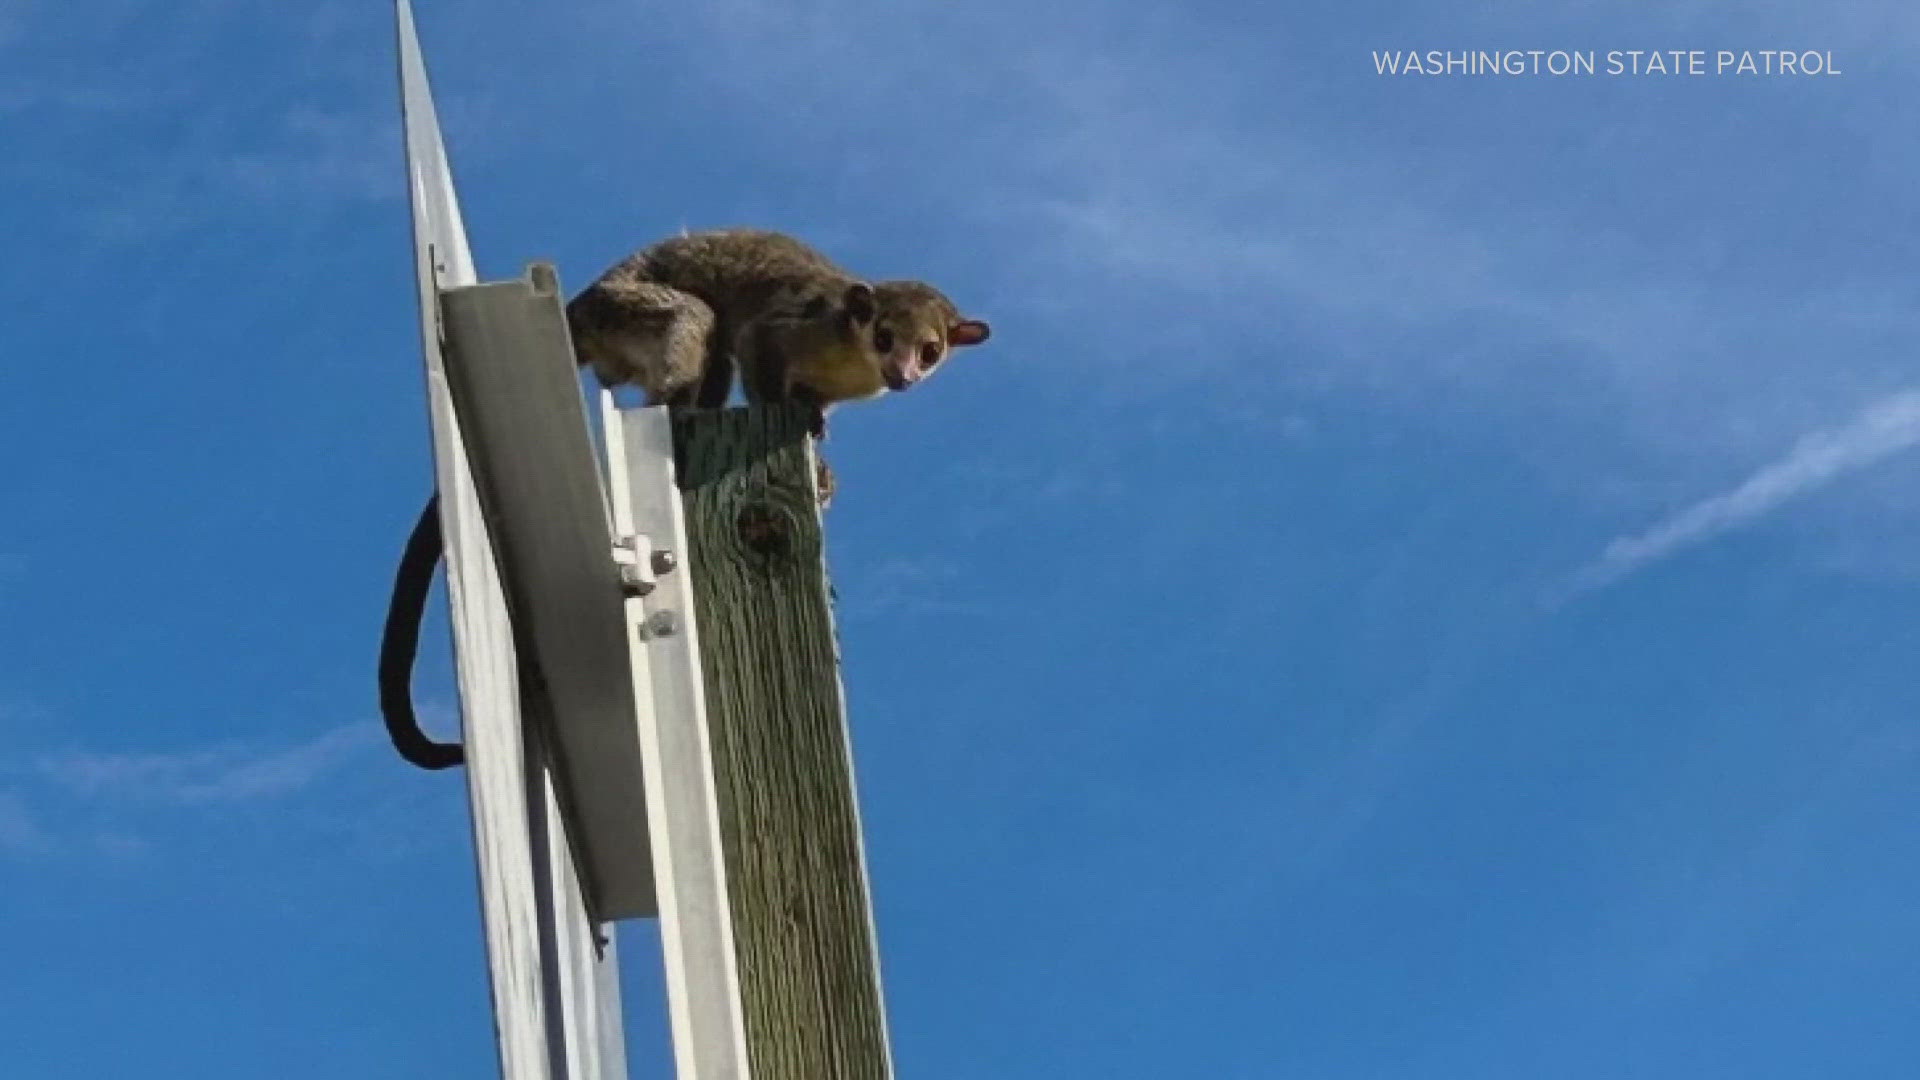 A police officer in Washington spotted an unusual little creature near a roadway sign.